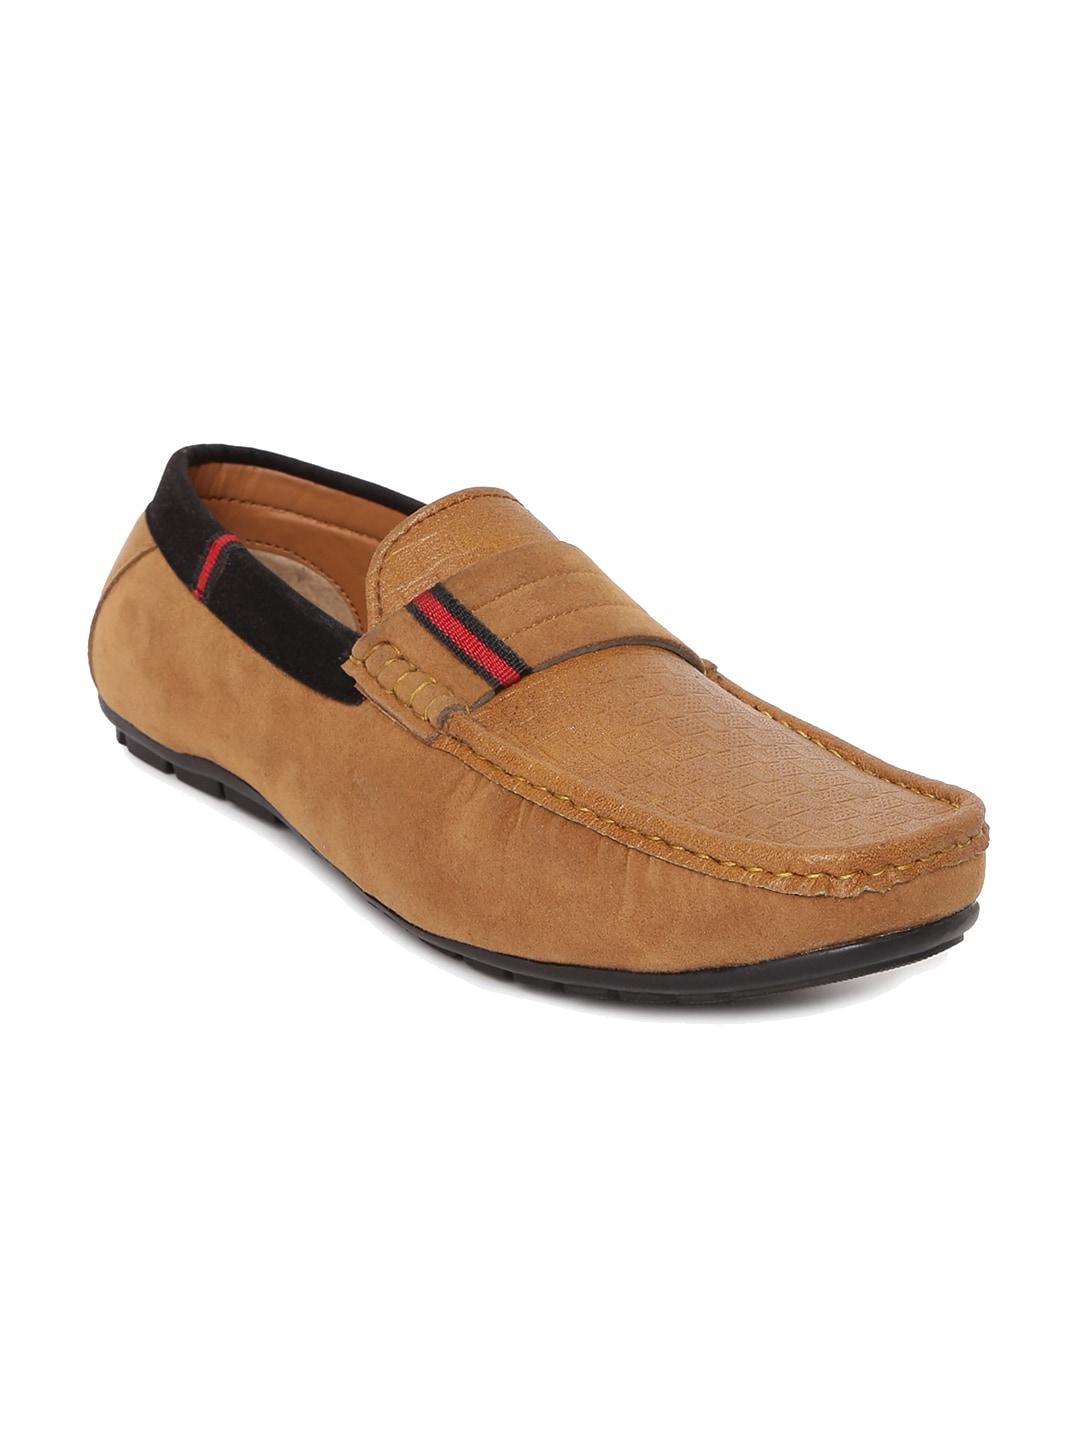 Paragon Tan Loafers